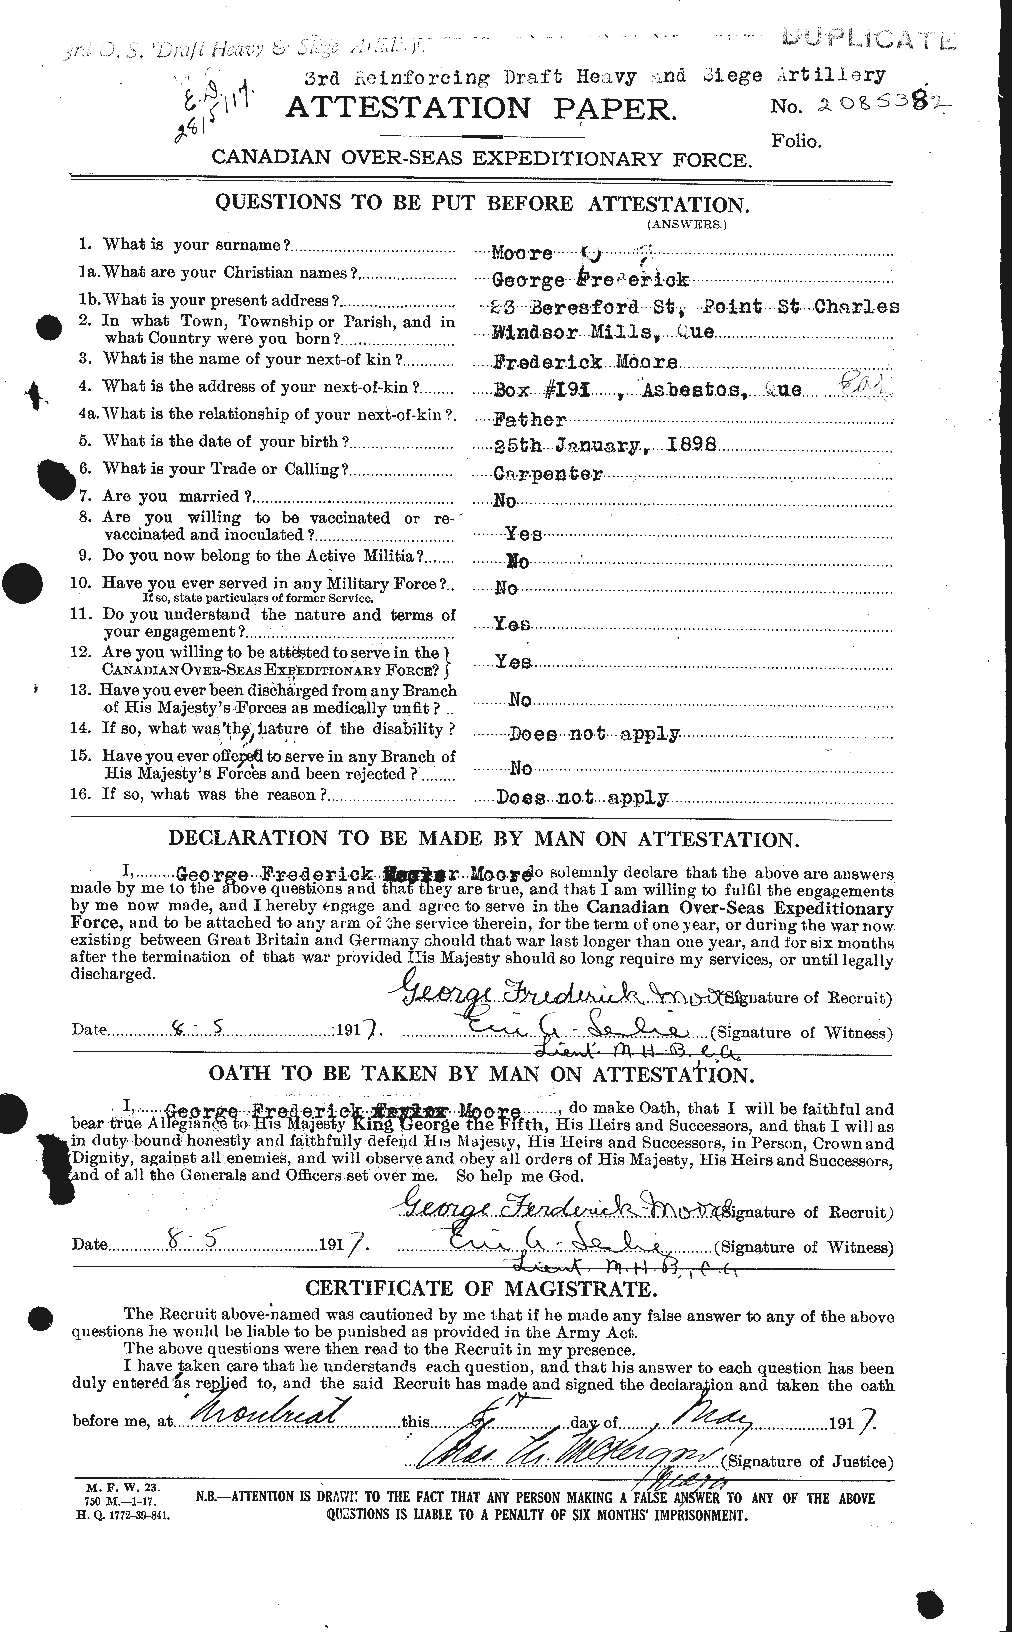 Personnel Records of the First World War - CEF 502004a